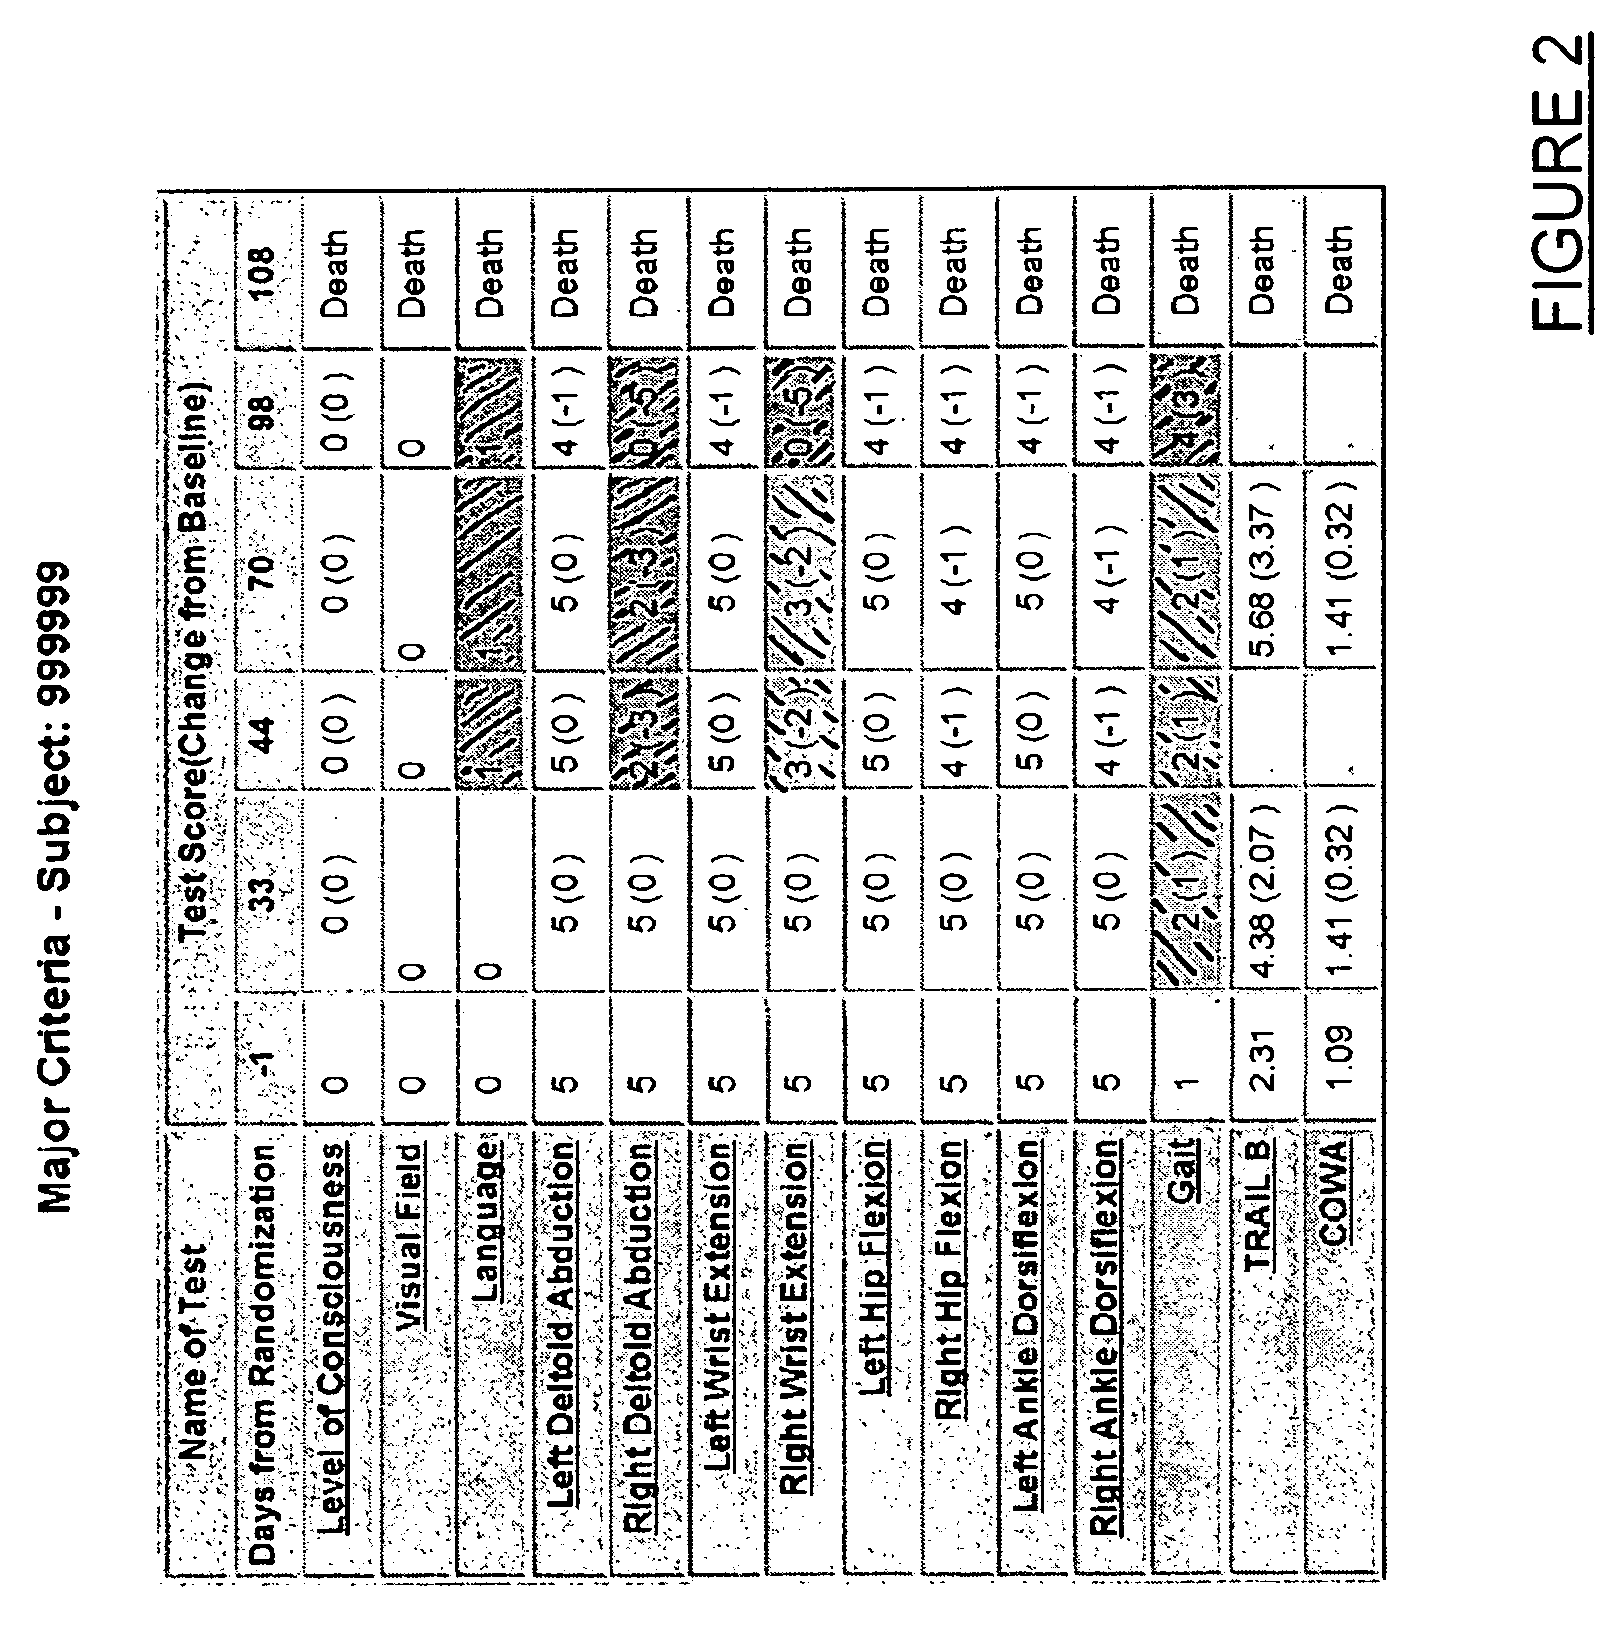 System and method for analysis of neurological condition